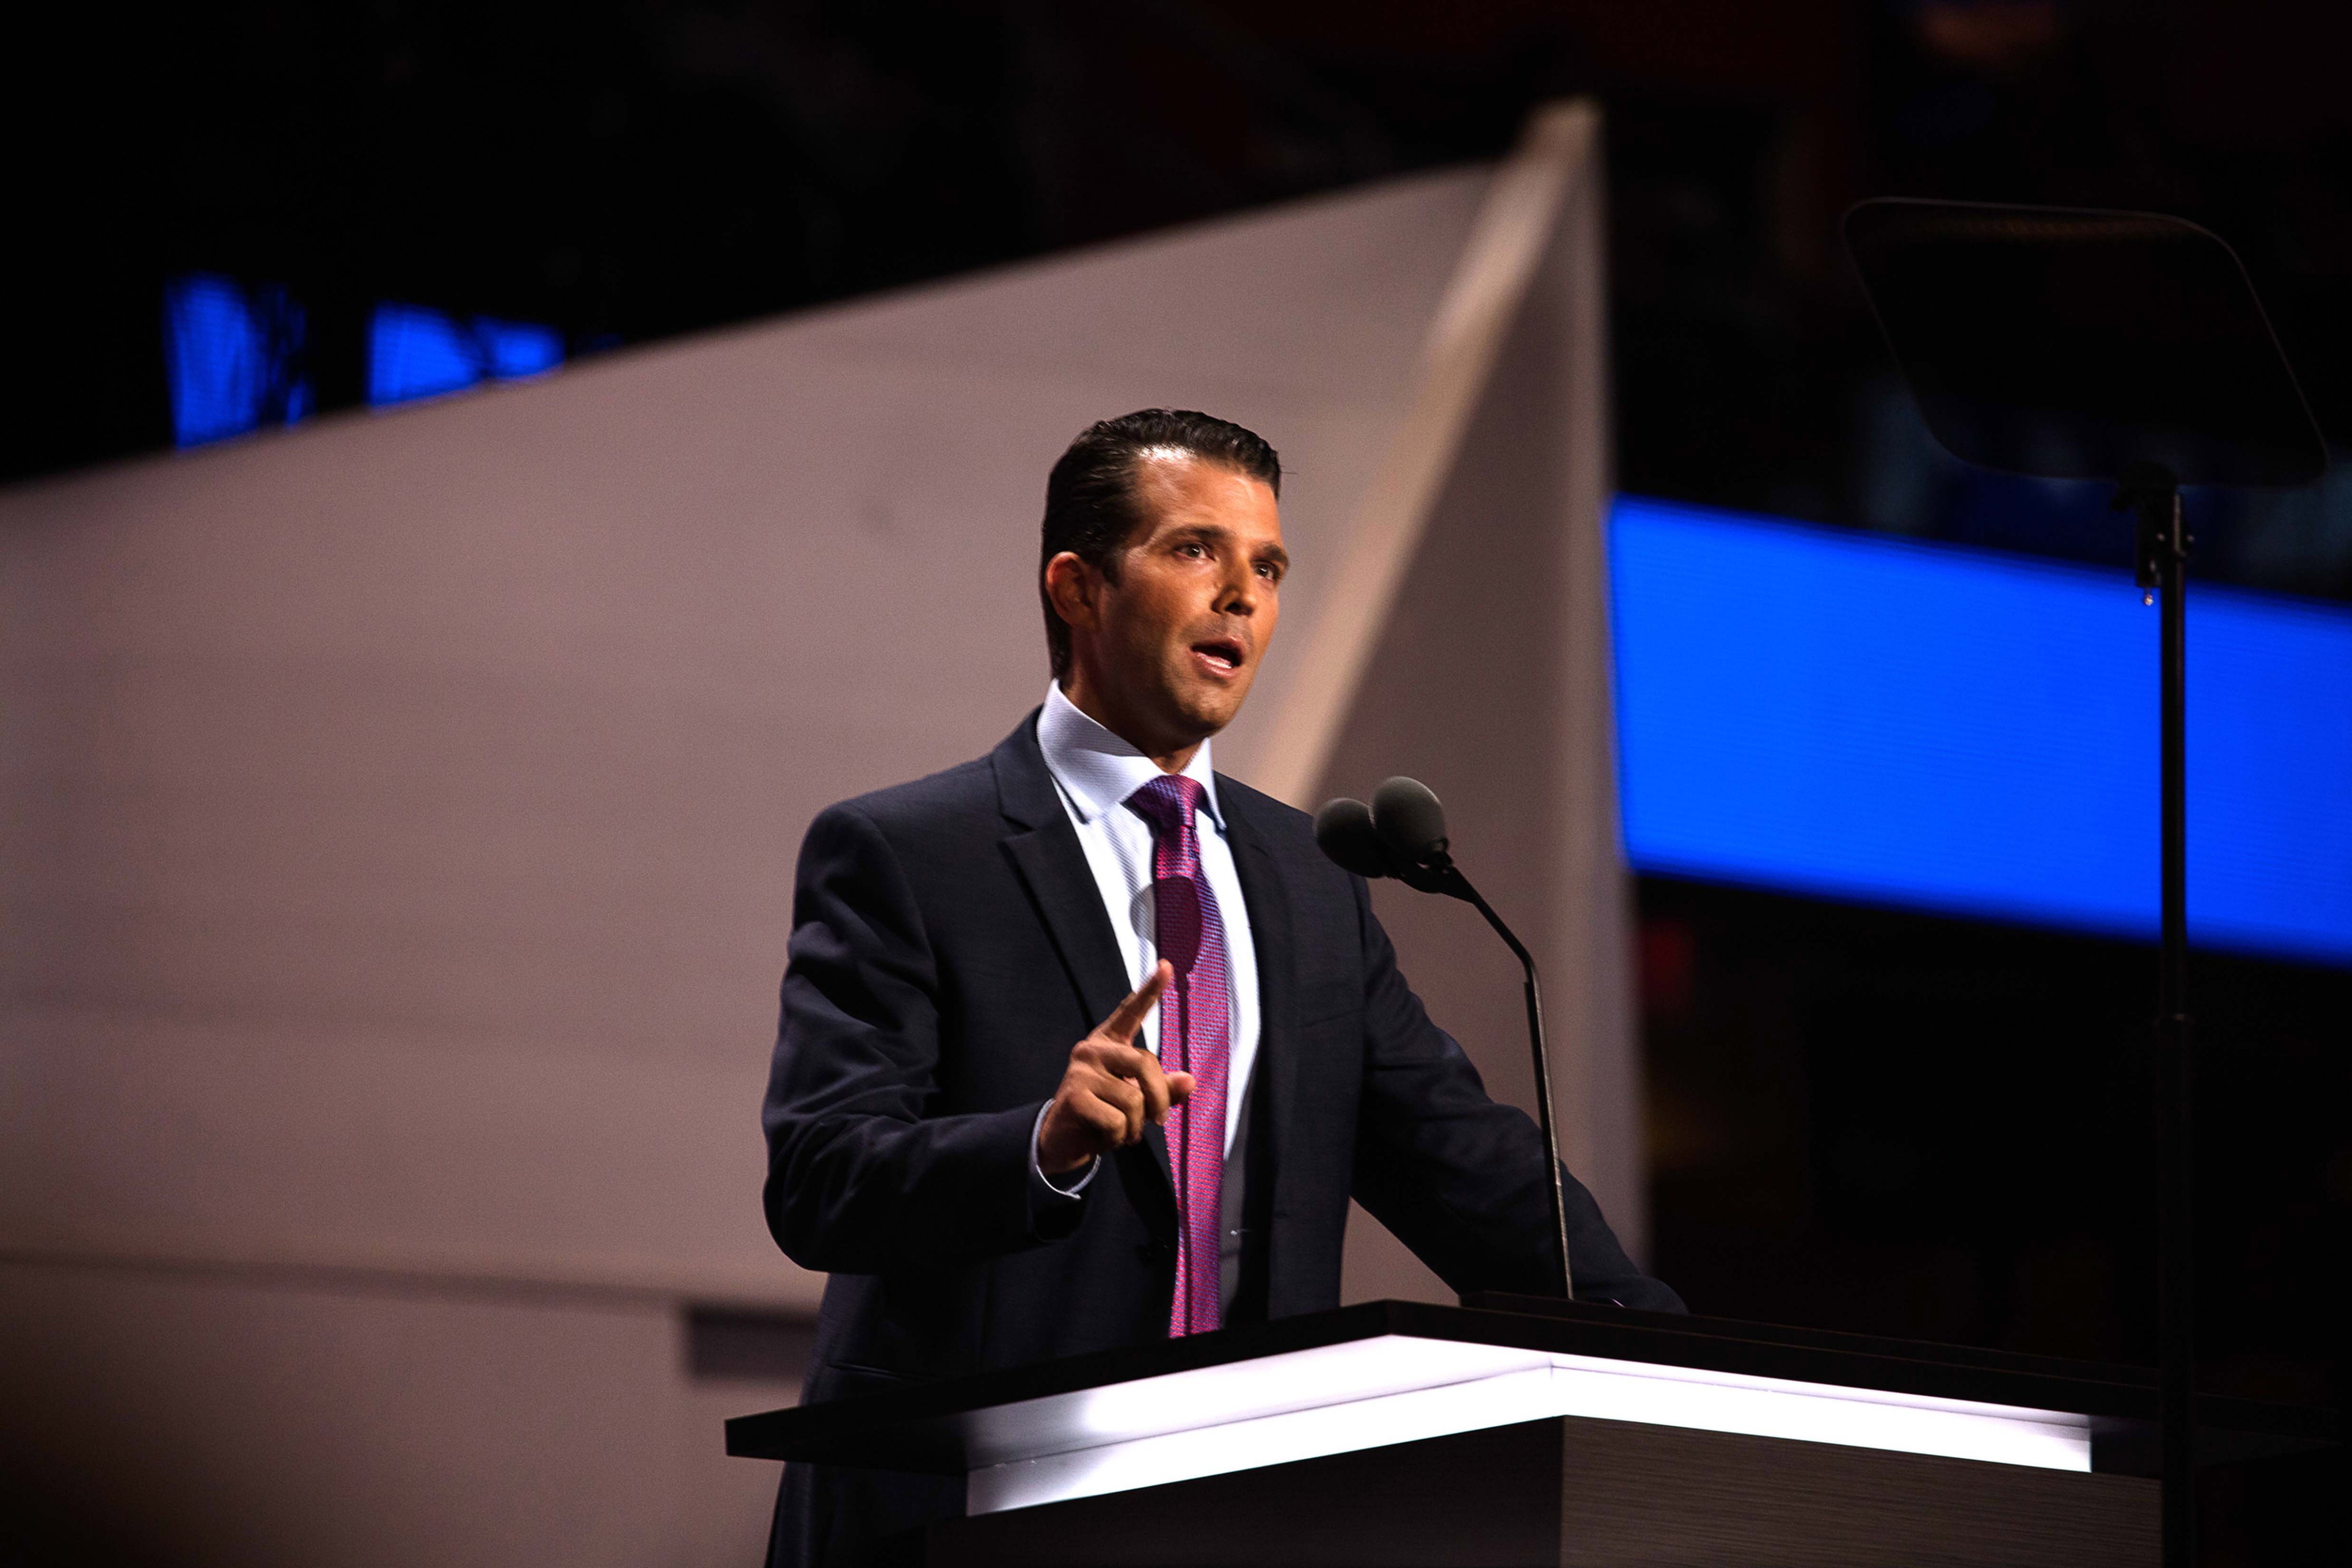 View of Donald Trump Jr, one of candidate Trump's sons, as he speaks from the podium during the Republican National Convention at Quicken Loans Arena, Cleveland, Ohio, July 19, 2016. (David Hume Kennerly&mdash;Getty Images)